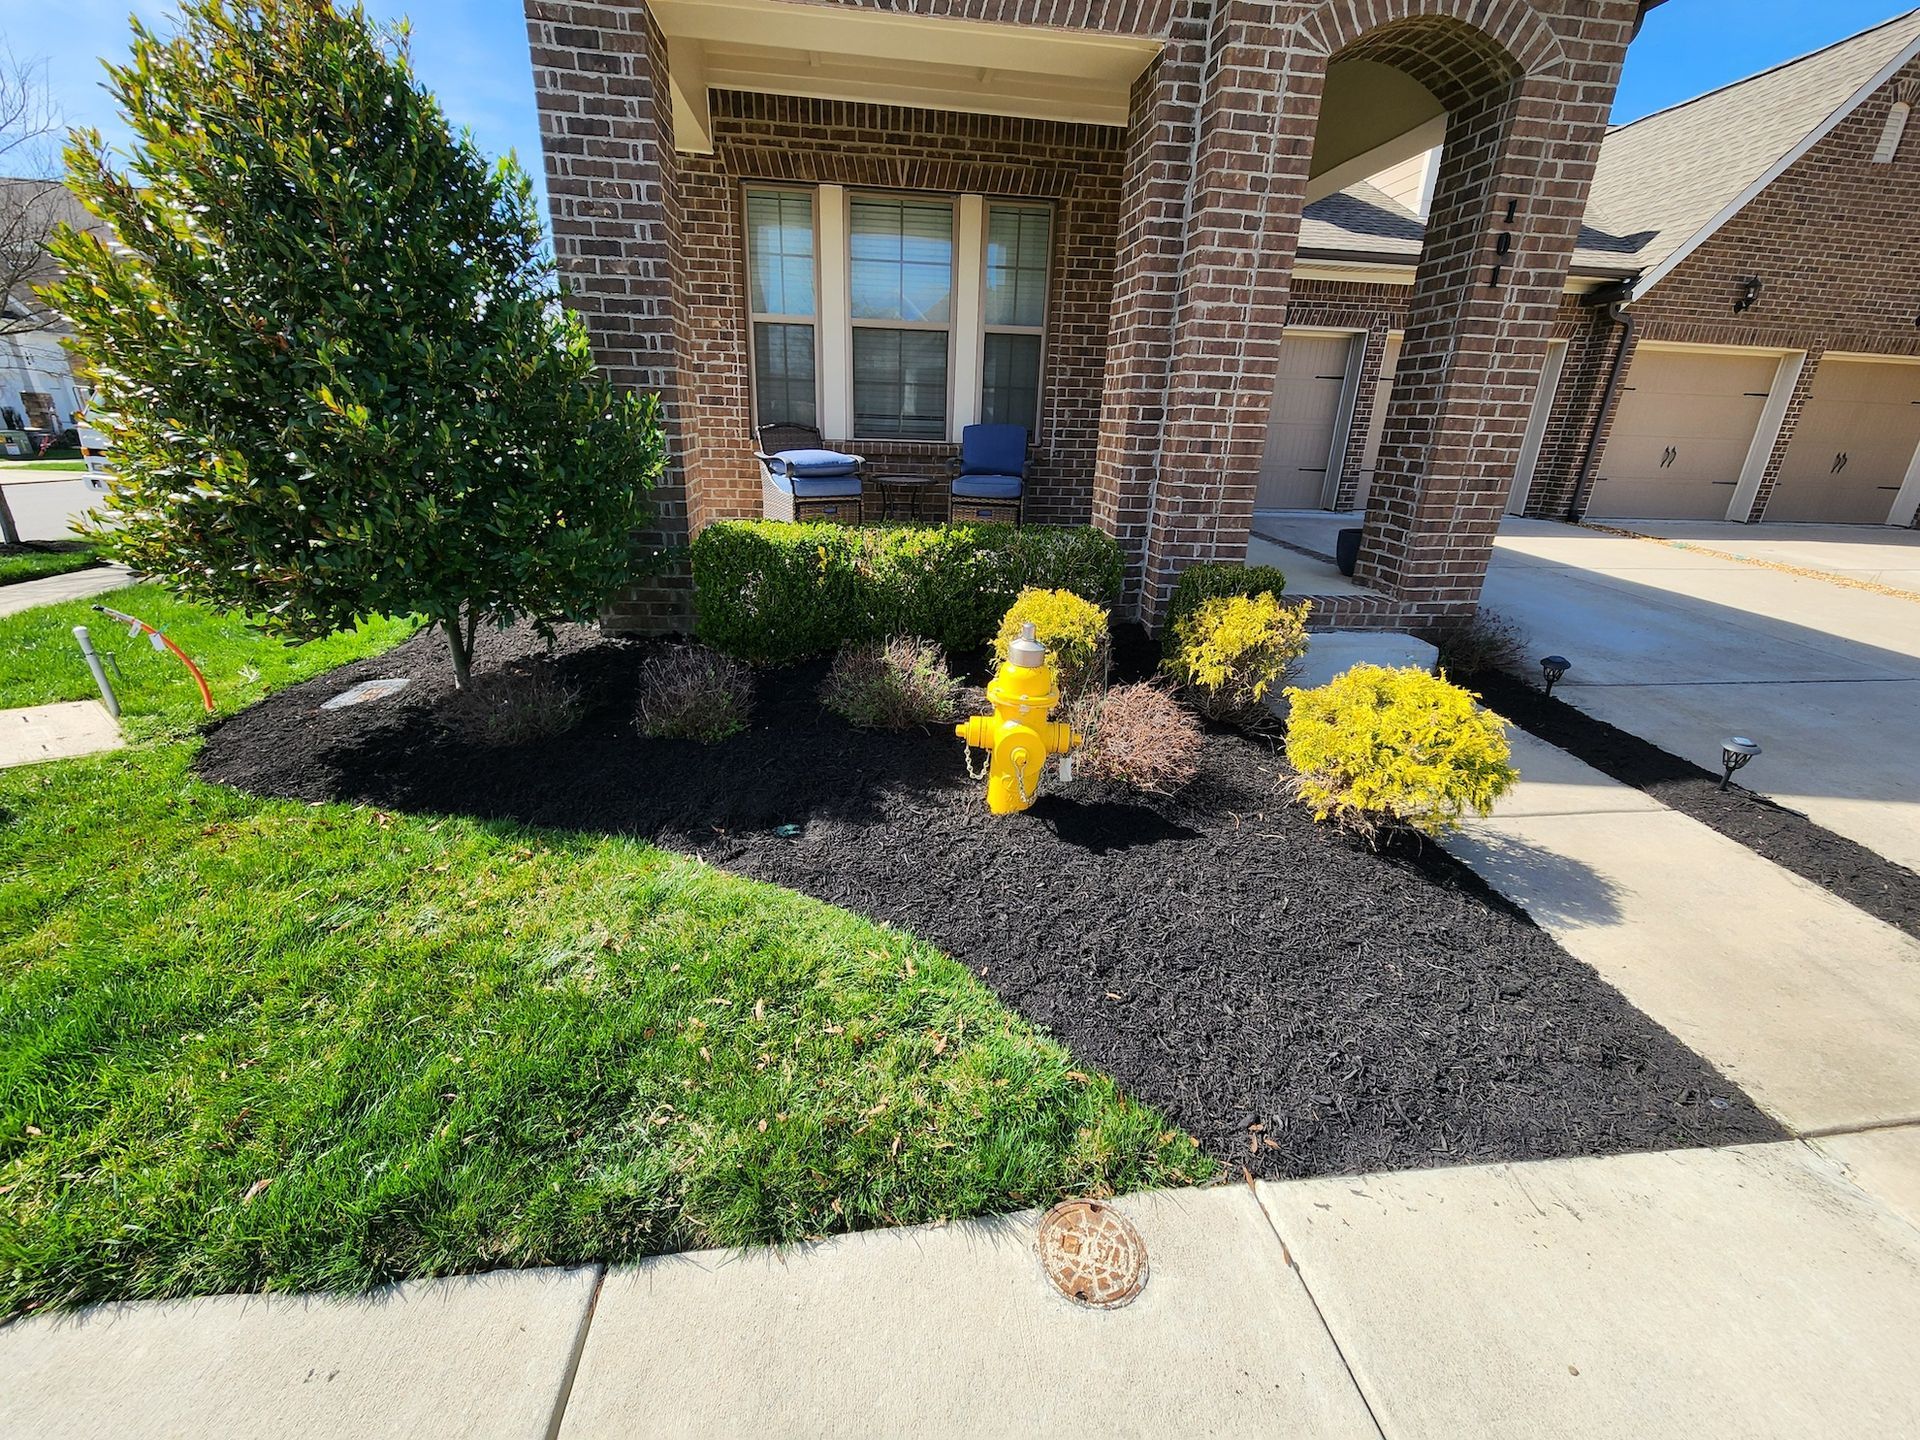 Mulch Install in residential landscape bed in front yard